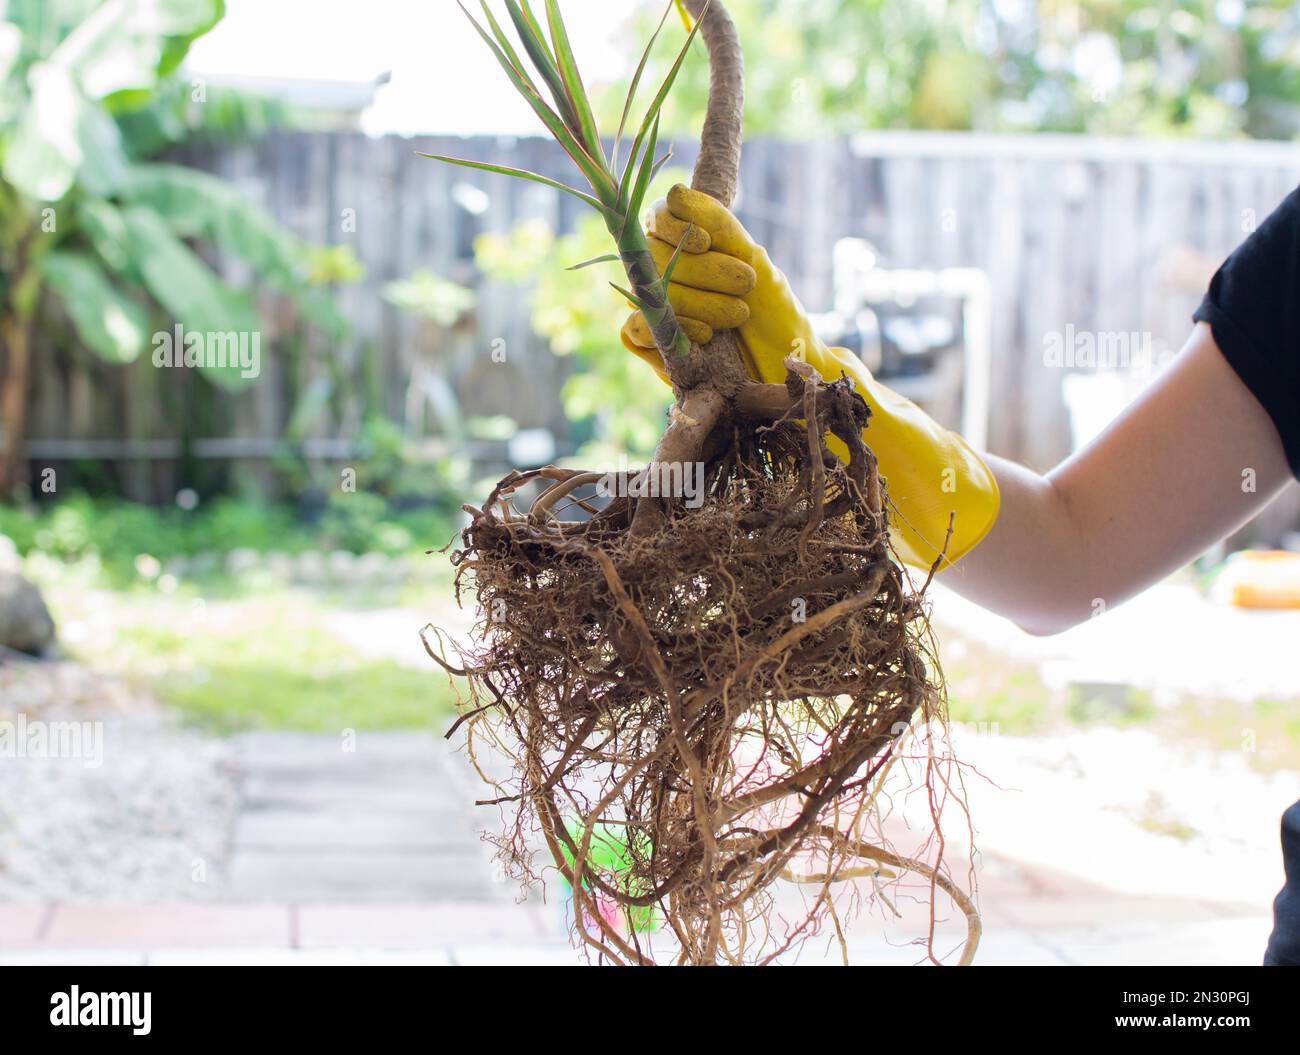 Hand in the gardening glove holding a plant with roots. Ready to repot a plant. Backyard gardening Stock Photo